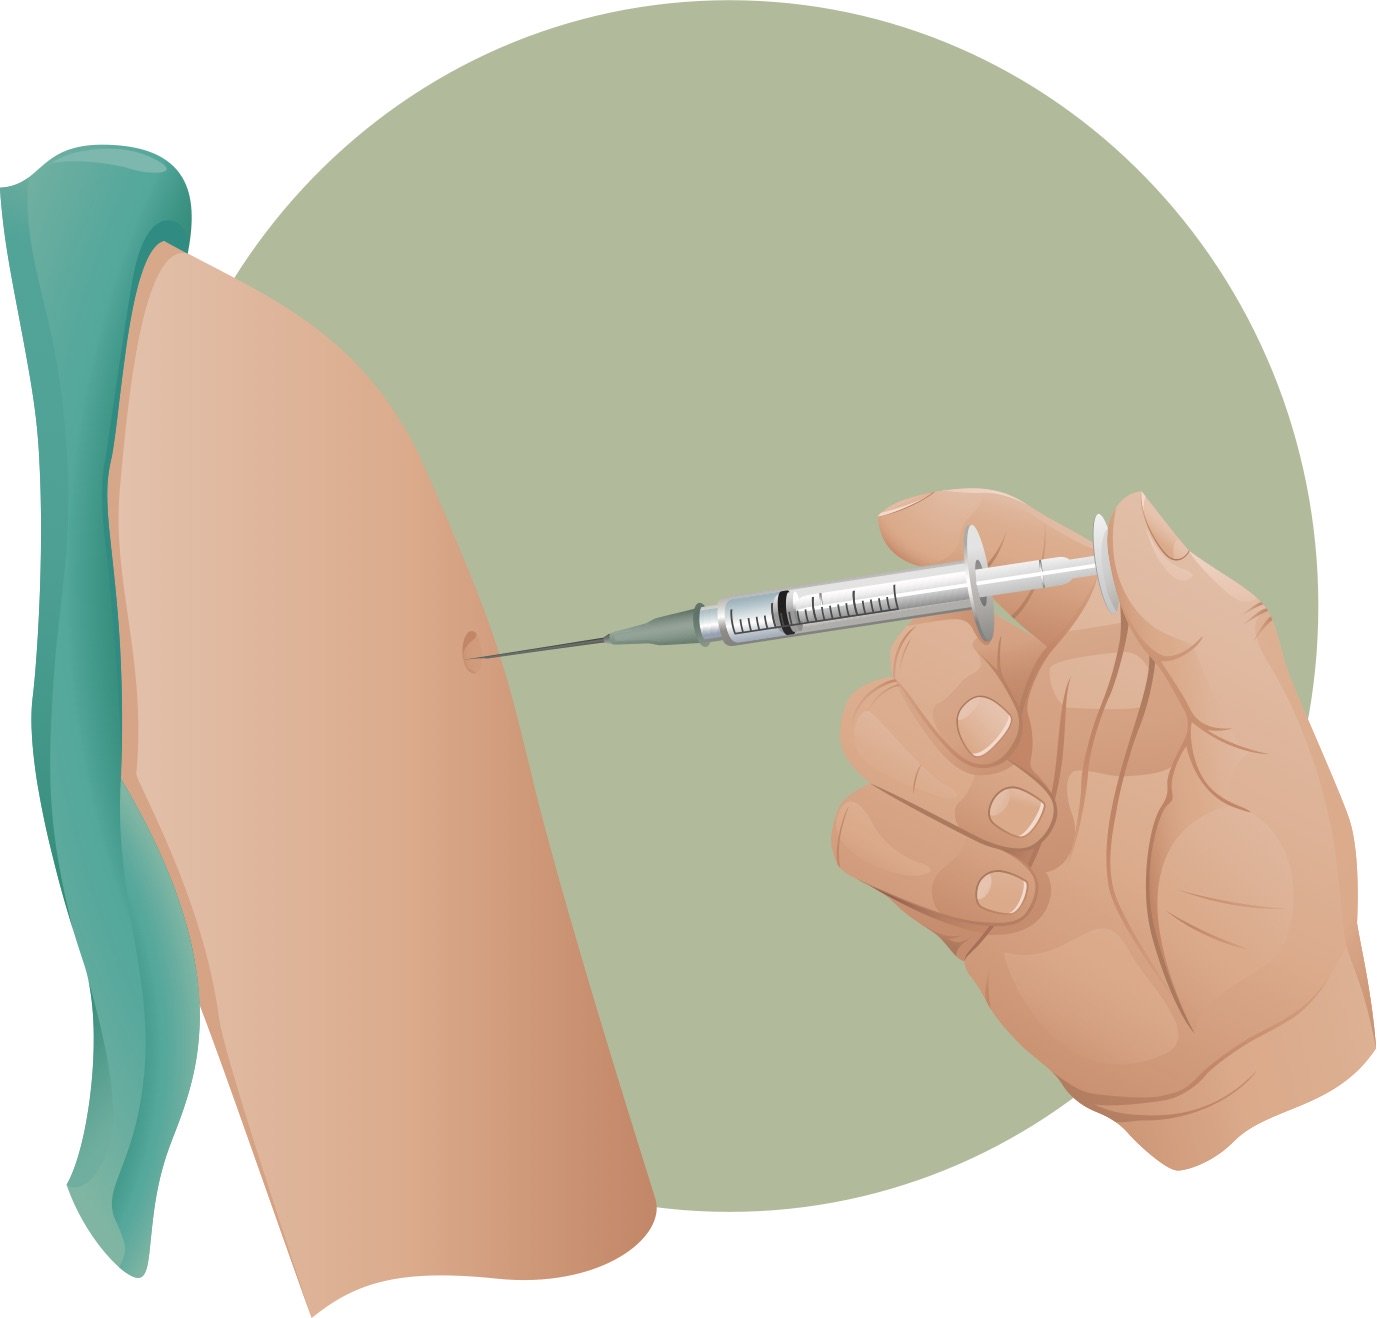 injection in the arm